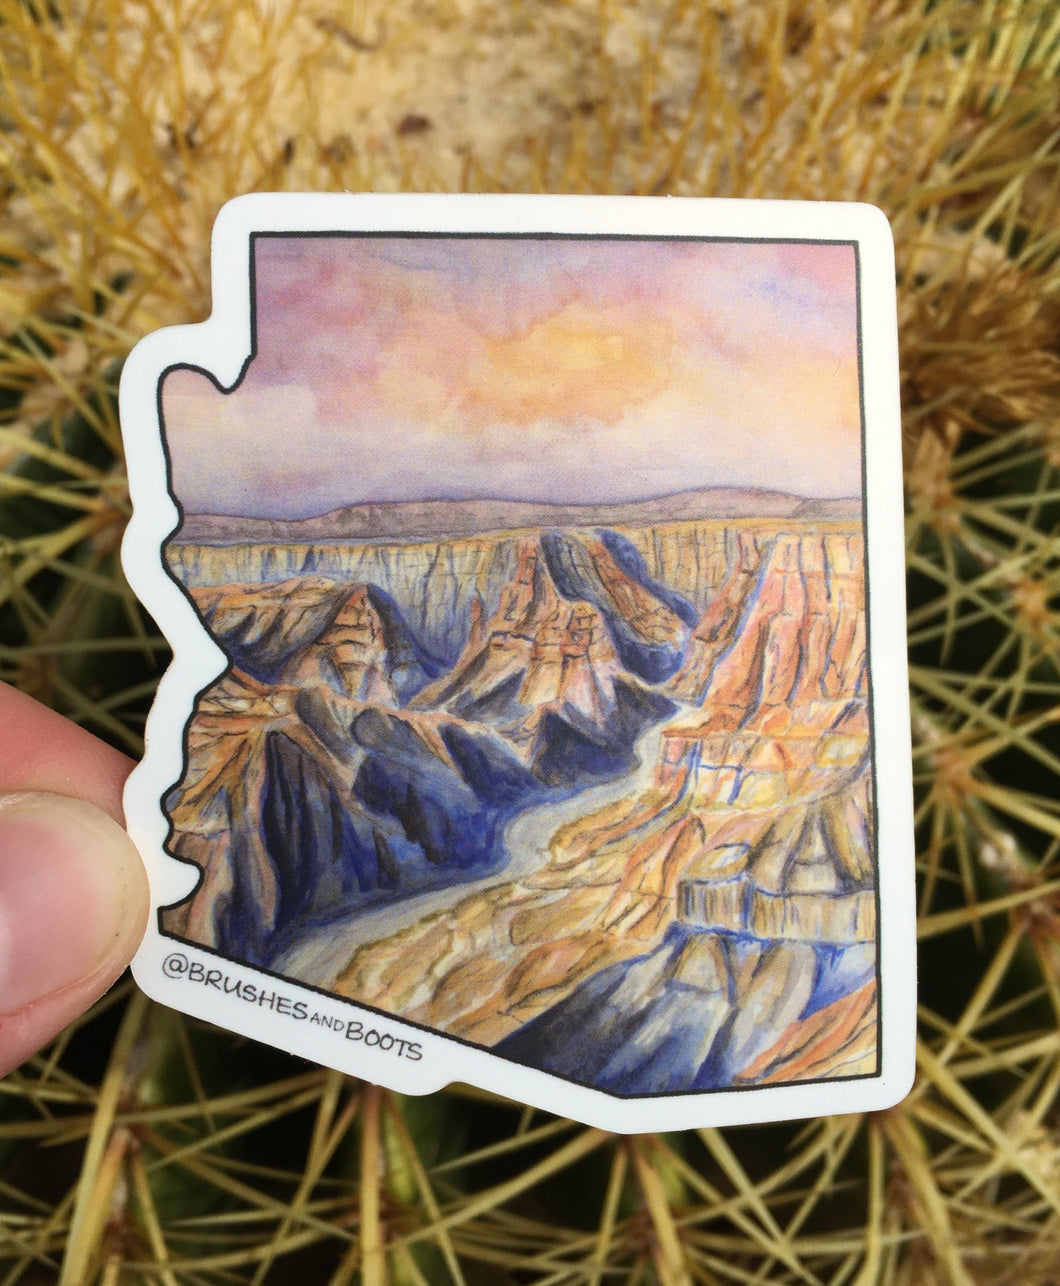 Vinyl sticker the shape of Arizona with a watercolor scene of the Grand Canyon at sunset with a pink/purple sky and deep shadows in the canyon with orange sun highlights